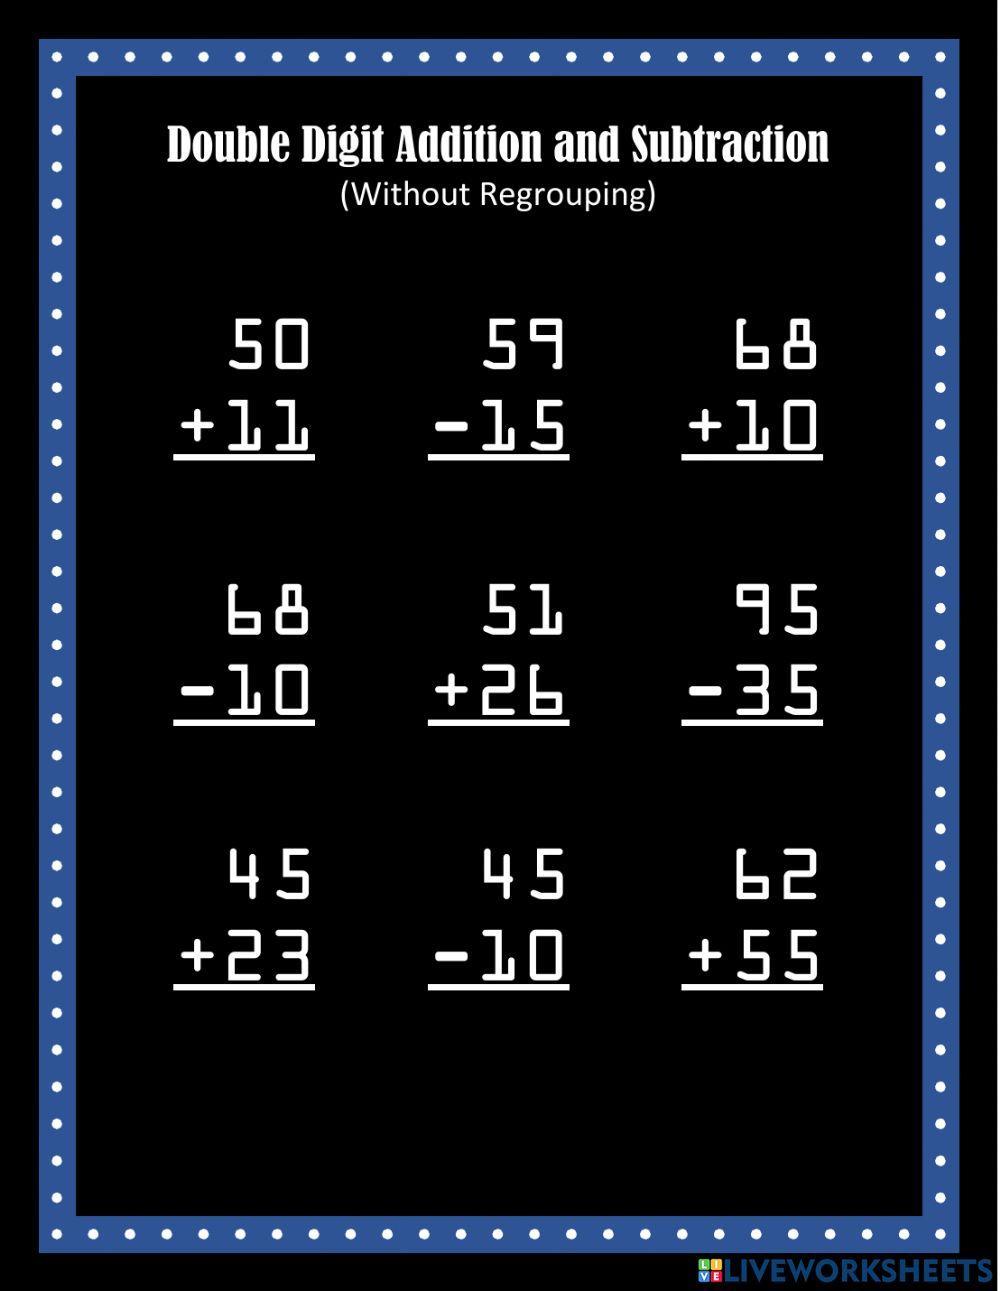 Double Digit Addition and Subtraction Set 9